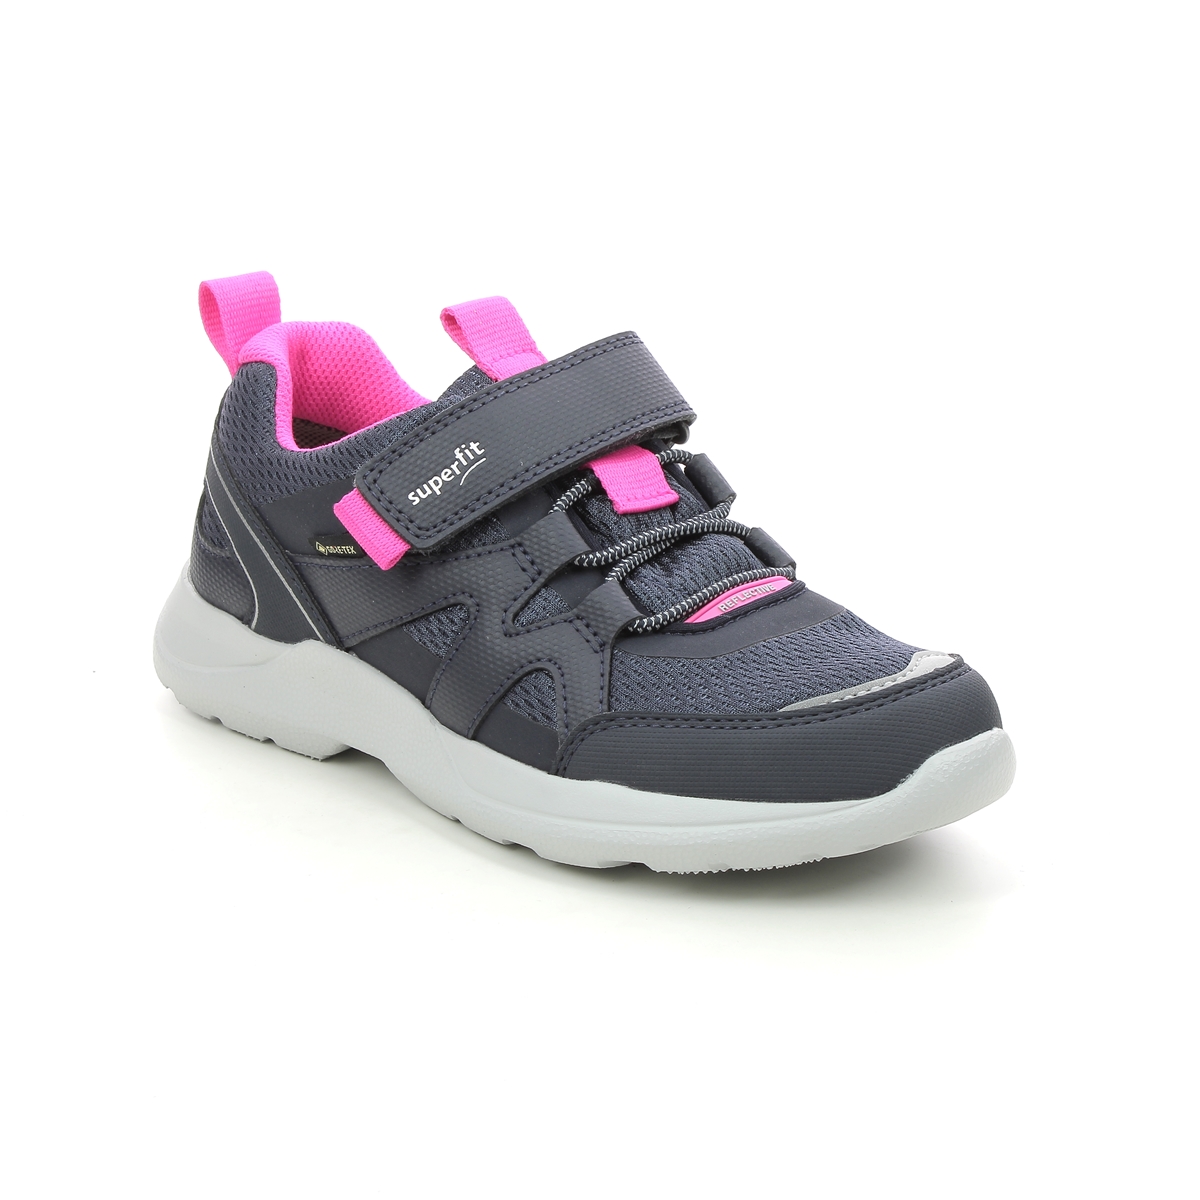 Superfit Rush Jnr G Gtx Navy Pink Kids girls trainers 1006219-8020 in a Plain  in Size 29